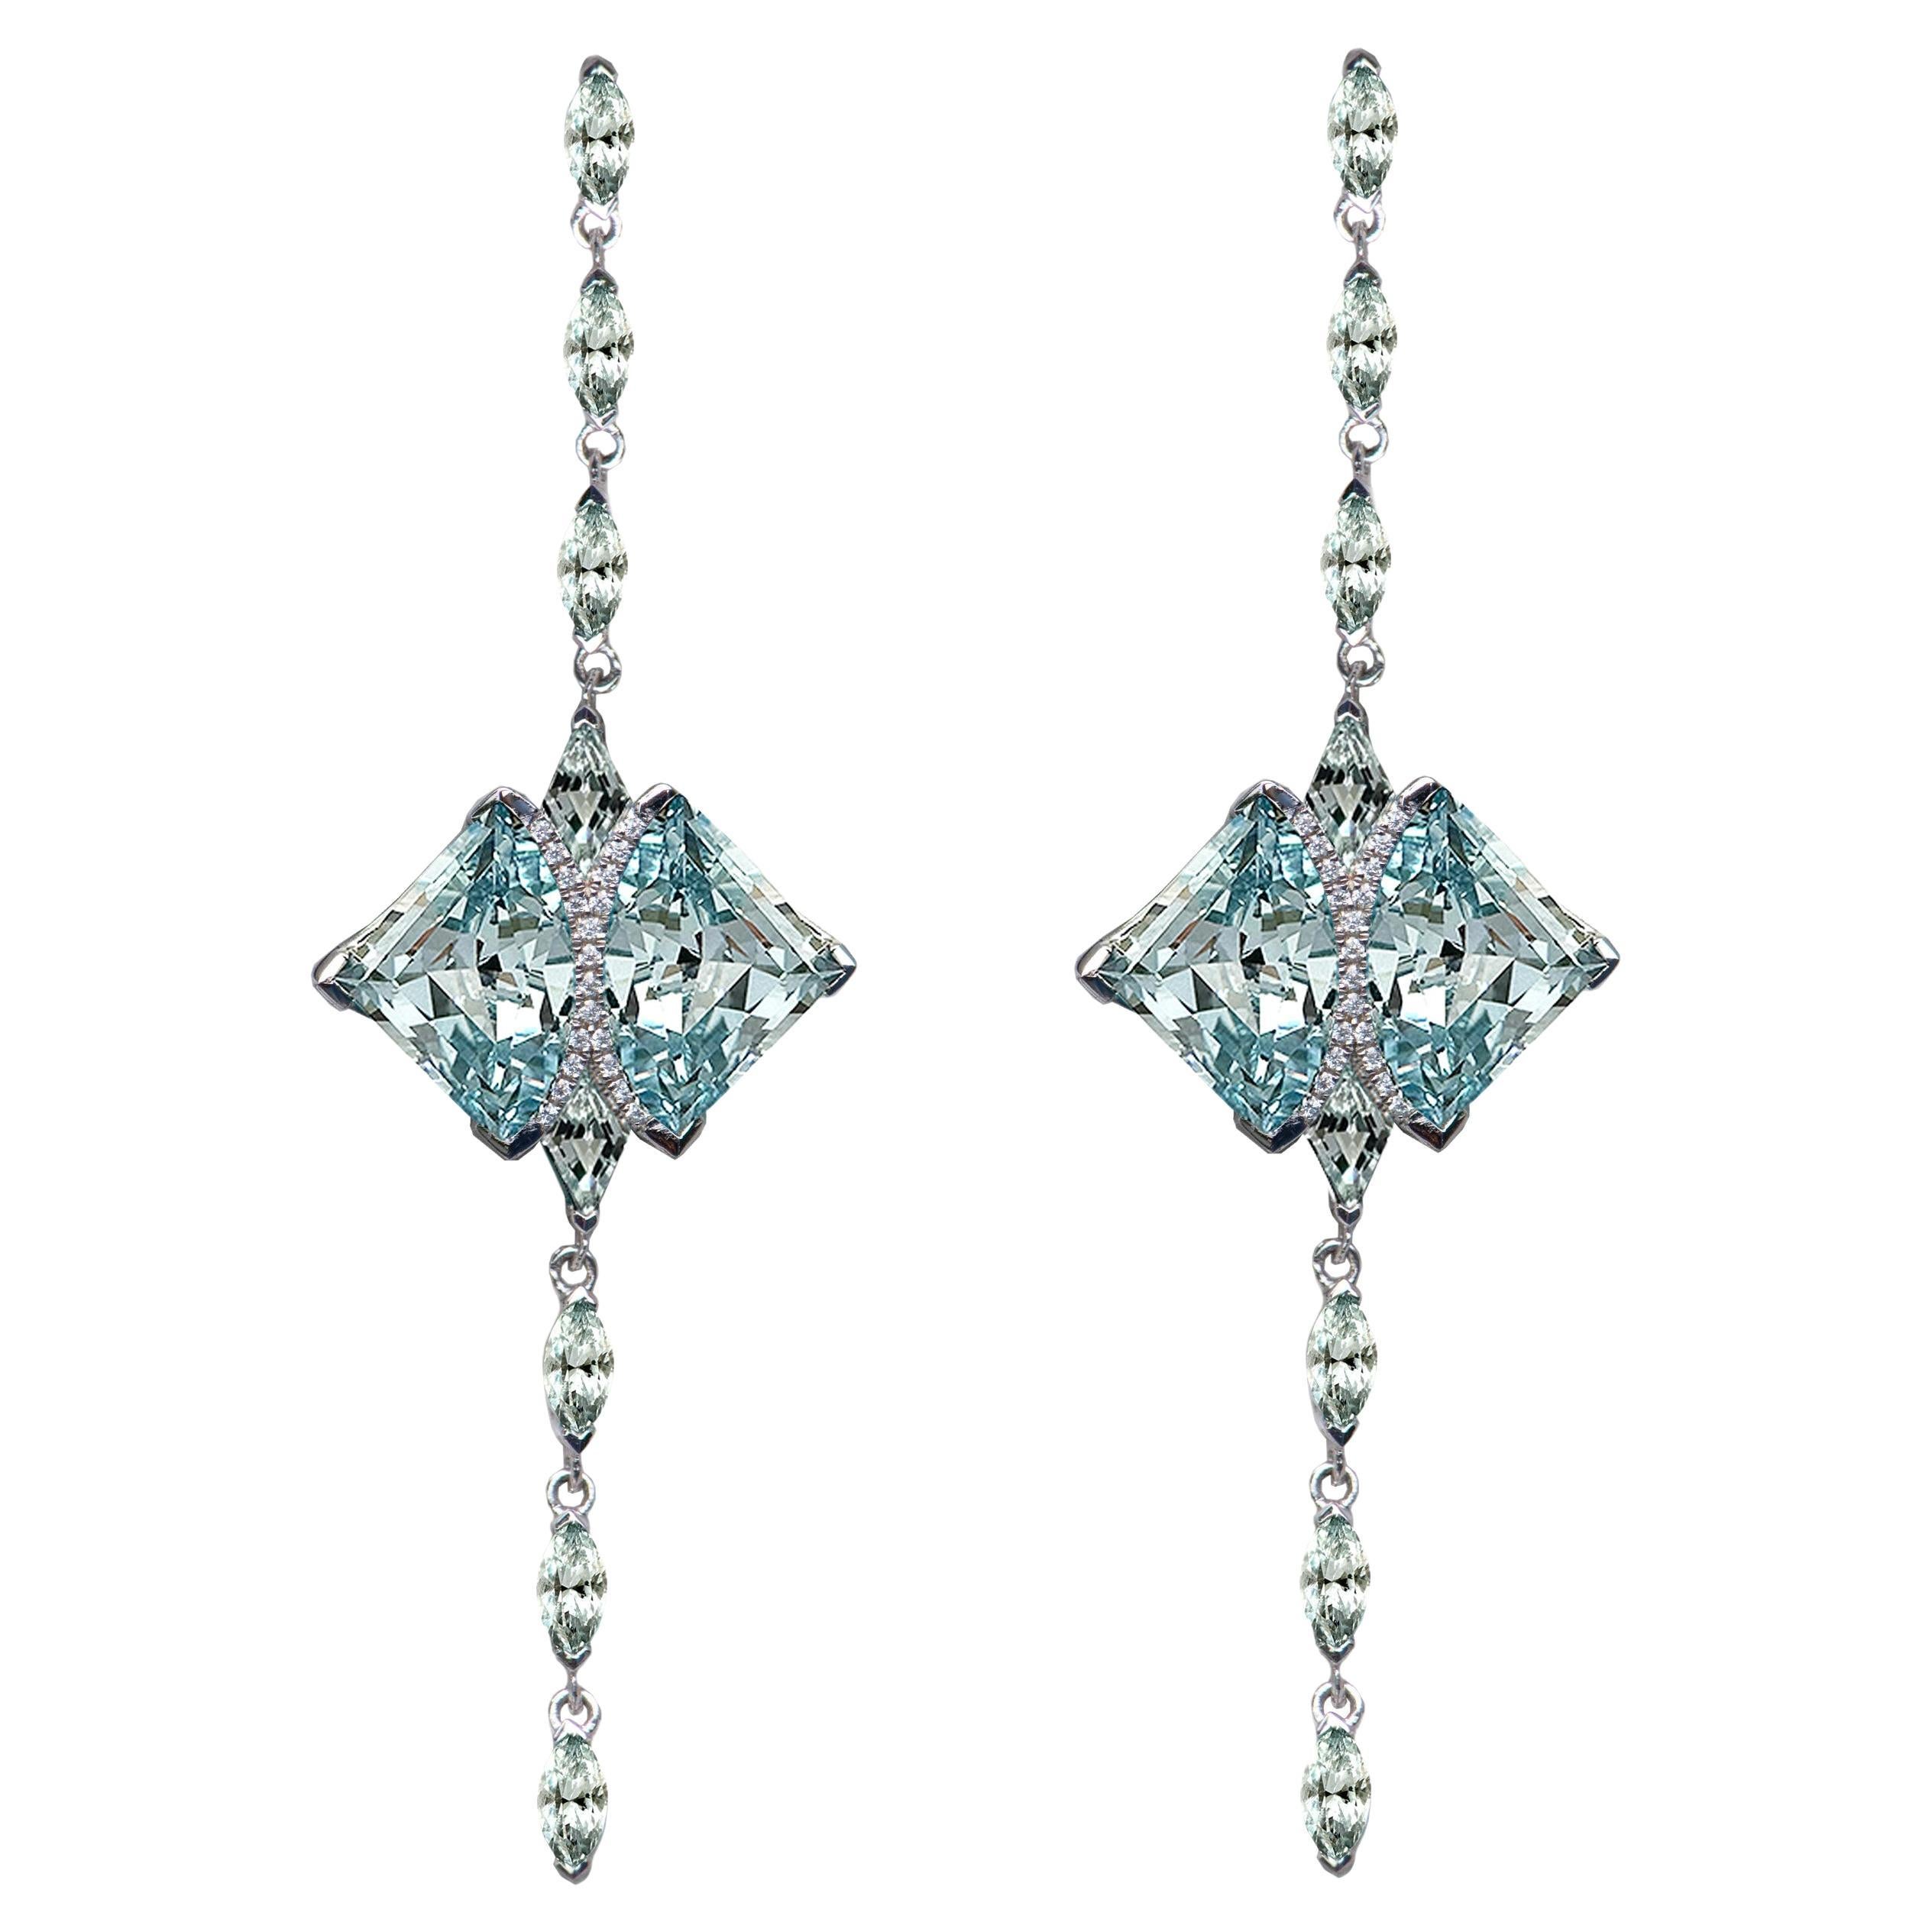 The 20ct Aquamarine Sapphire Eagle Ray Drop Earrings, 10kt White Gold For Sale